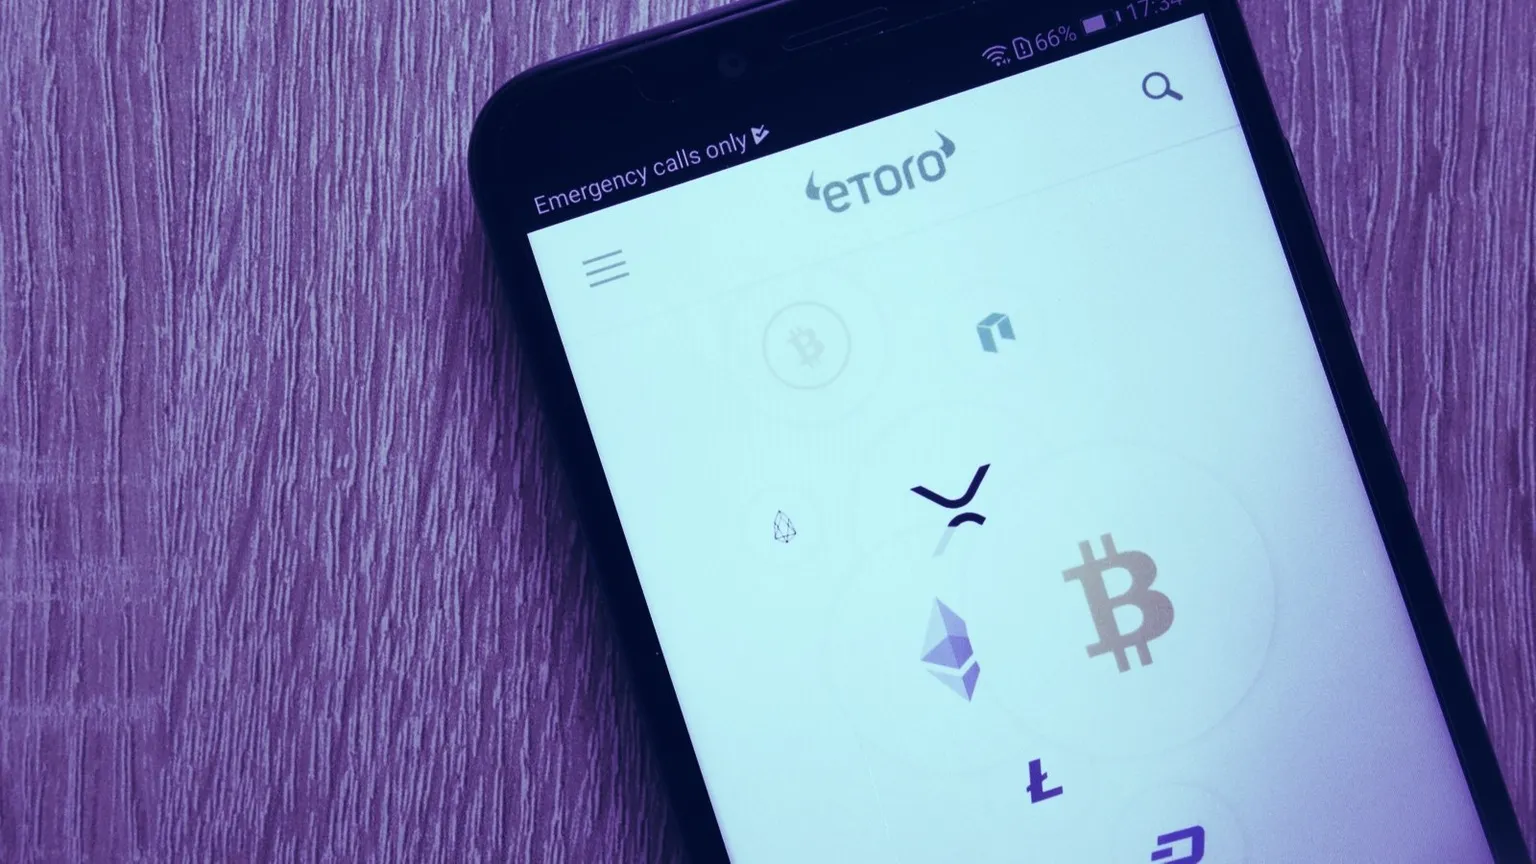 etoro enables staking service for tron (TRX) and cardano (ADA). Image: Shutterstock